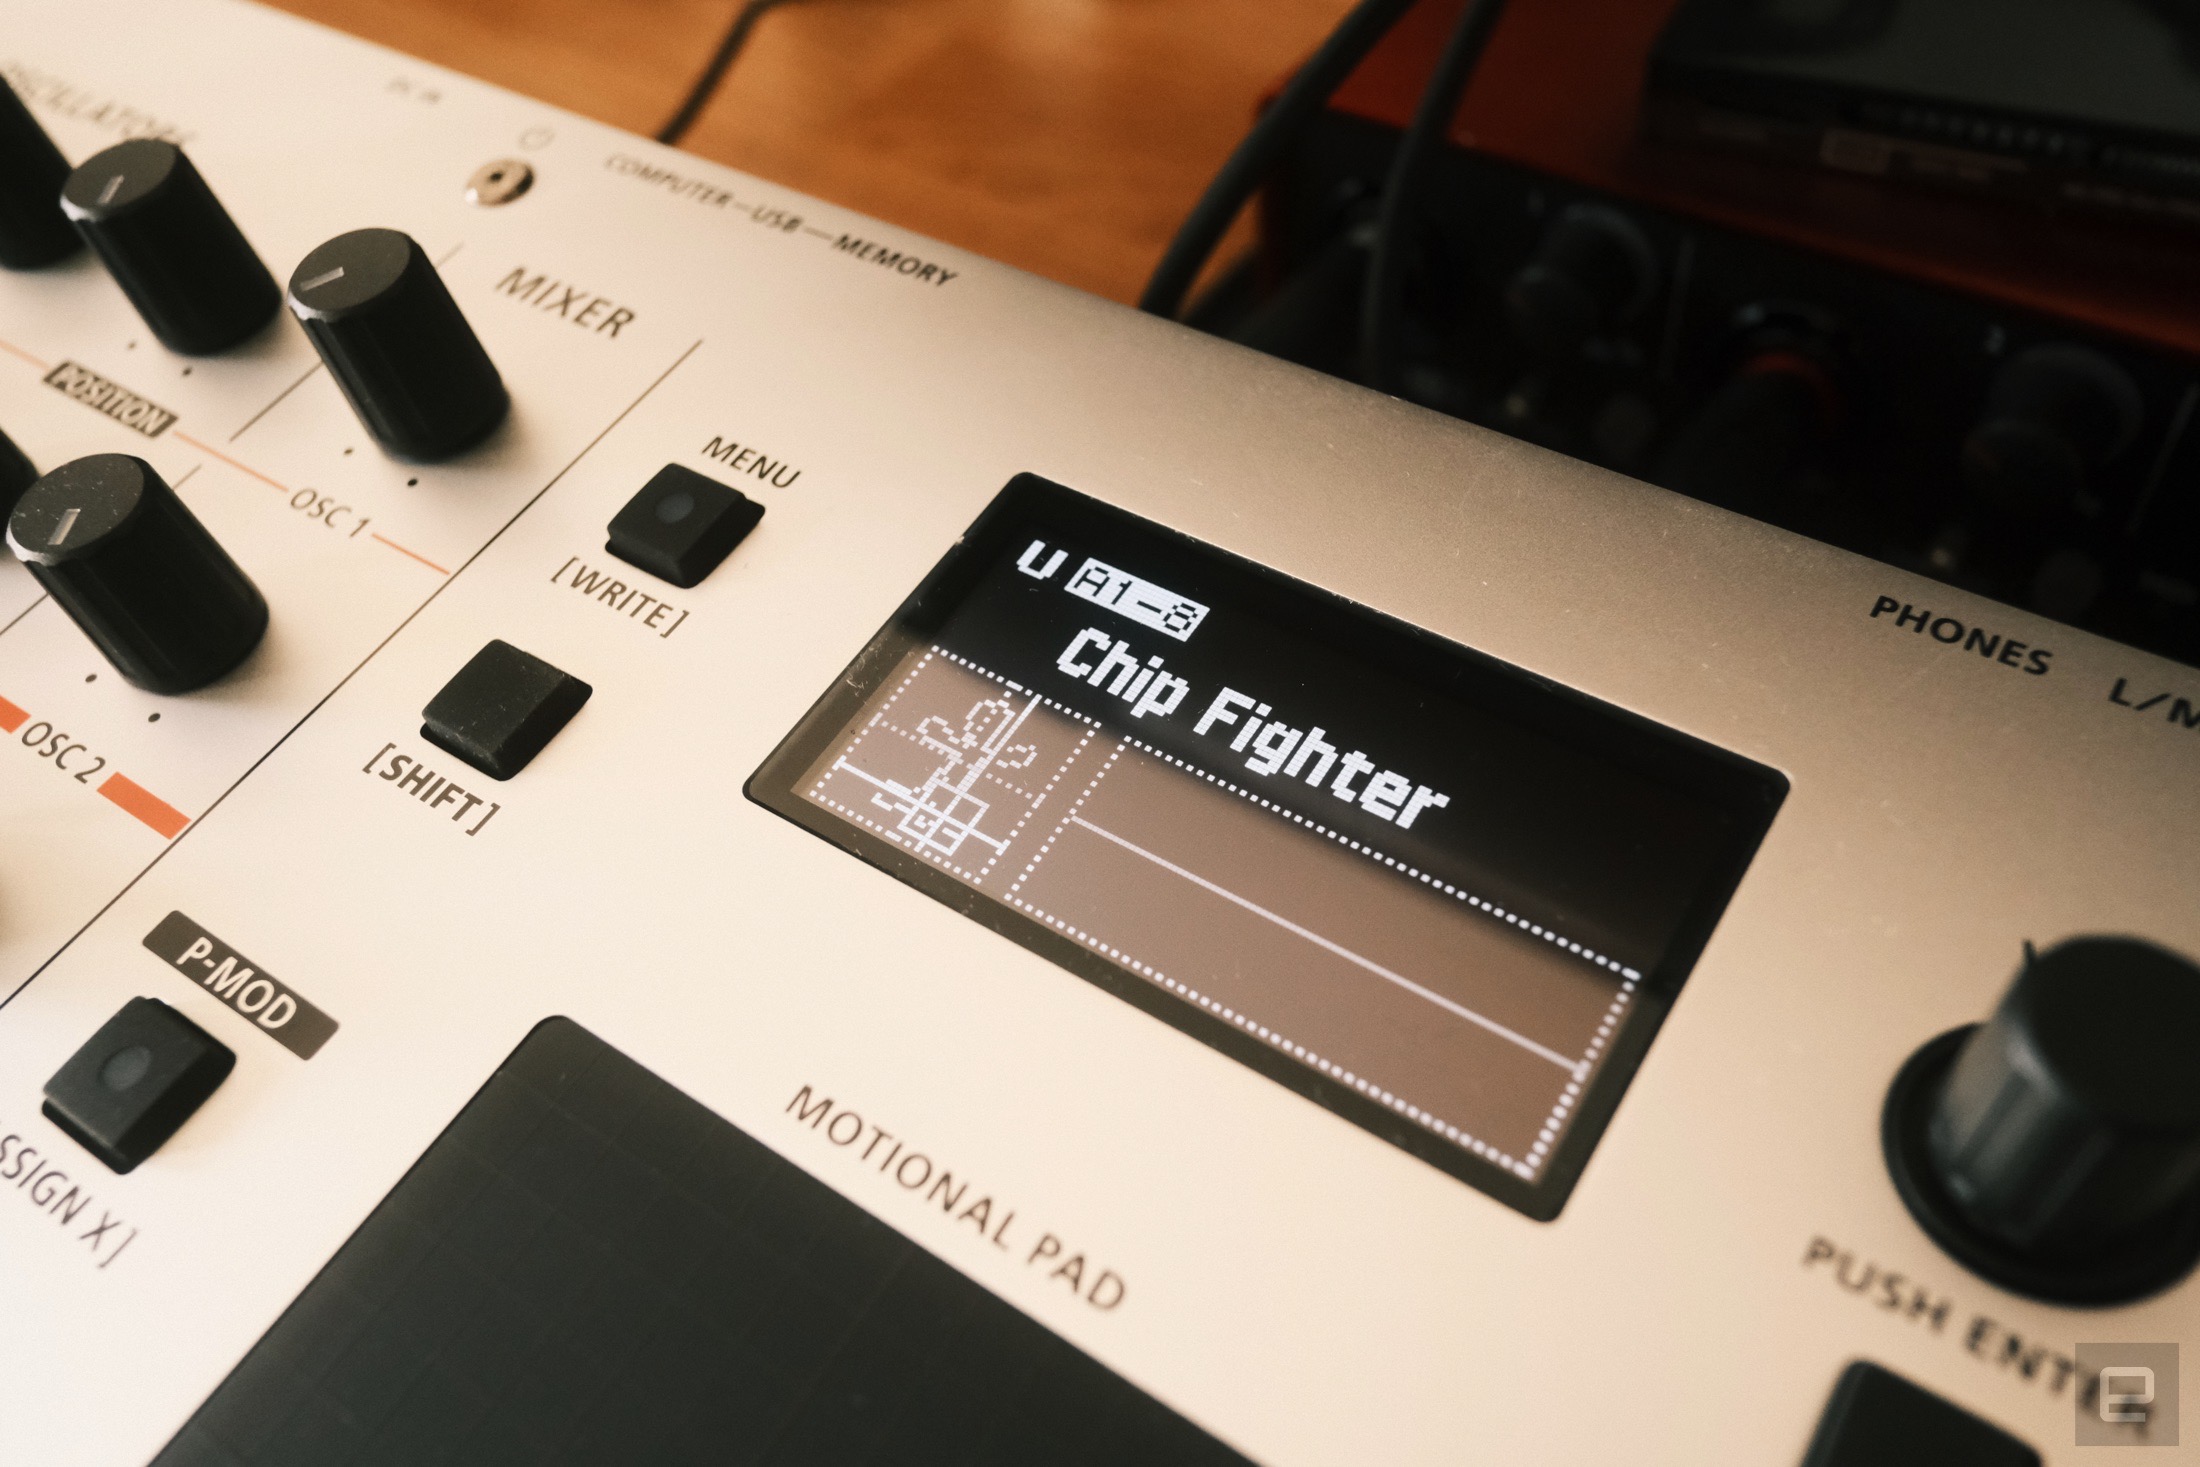 The Chip Fighter patch on Roland Gaia 2 shows automation that draws the lines of a tiny human.